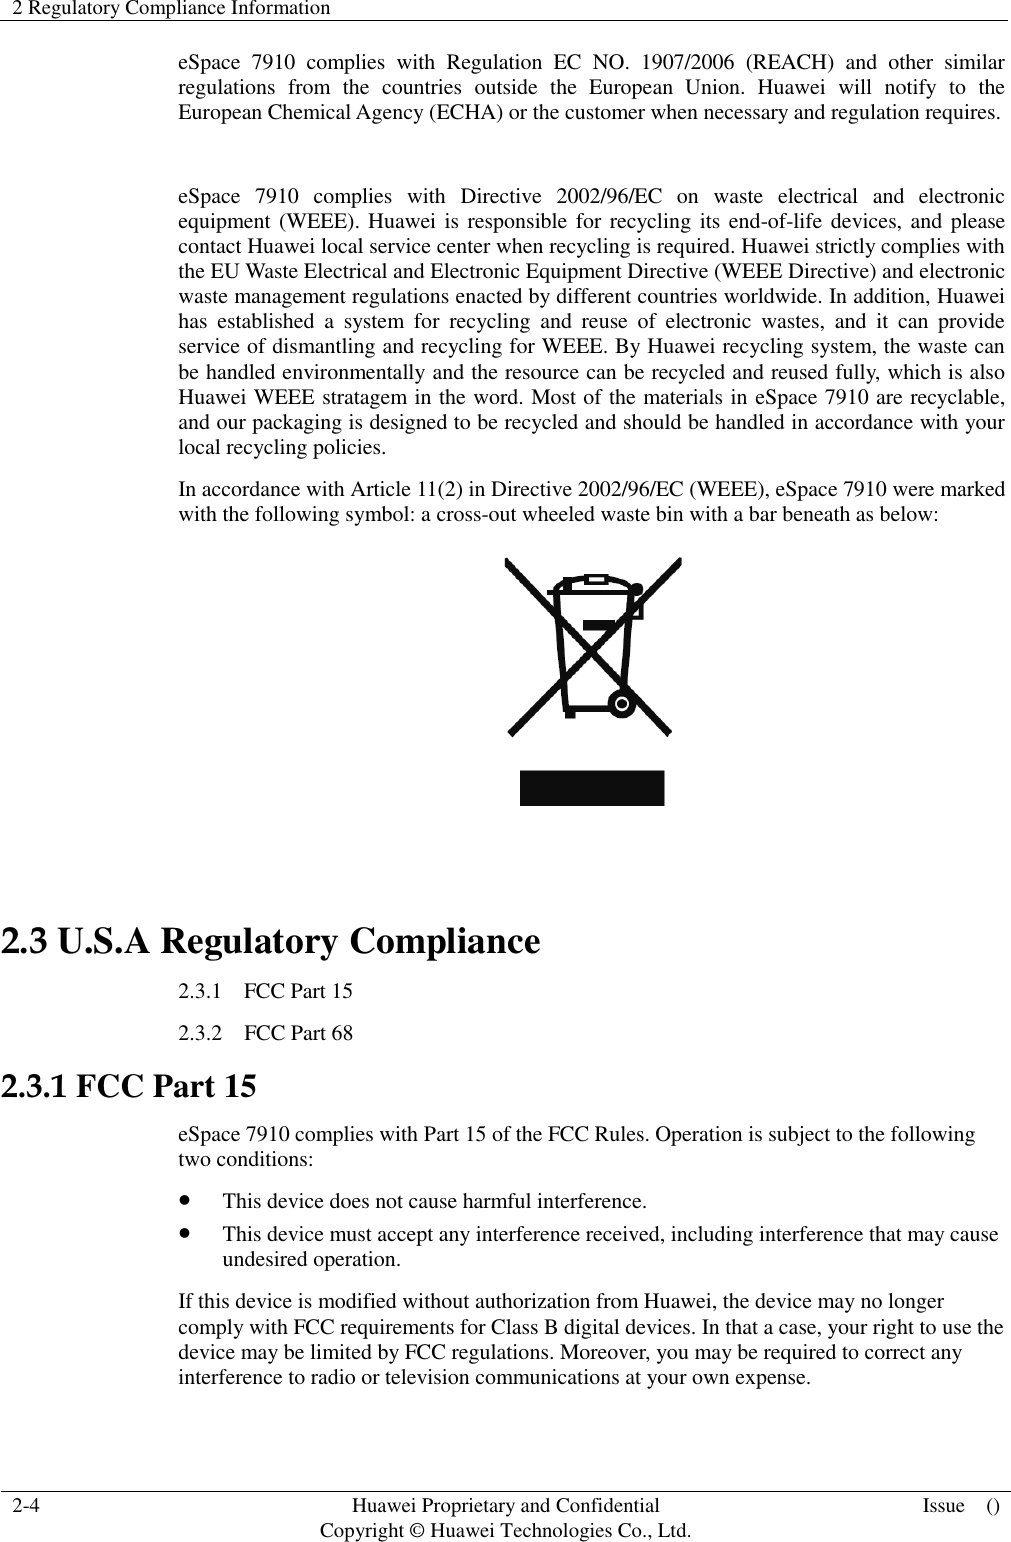 2 Regulatory Compliance Information    2-4 Huawei Proprietary and Confidential                                     Copyright © Huawei Technologies Co., Ltd. Issue    ()  eSpace  7910  complies  with  Regulation  EC  NO.  1907/2006  (REACH)  and  other  similar regulations  from  the  countries  outside  the  European  Union.  Huawei  will  notify  to  the European Chemical Agency (ECHA) or the customer when necessary and regulation requires.  eSpace  7910  complies  with  Directive  2002/96/EC  on  waste  electrical  and  electronic equipment (WEEE). Huawei is  responsible for recycling its end-of-life devices, and please contact Huawei local service center when recycling is required. Huawei strictly complies with the EU Waste Electrical and Electronic Equipment Directive (WEEE Directive) and electronic waste management regulations enacted by different countries worldwide. In addition, Huawei has  established  a  system  for  recycling  and  reuse  of  electronic  wastes,  and  it  can  provide service of dismantling and recycling for WEEE. By Huawei recycling system, the waste can be handled environmentally and the resource can be recycled and reused fully, which is also Huawei WEEE stratagem in the word. Most of the materials in eSpace 7910 are recyclable, and our packaging is designed to be recycled and should be handled in accordance with your local recycling policies.   In accordance with Article 11(2) in Directive 2002/96/EC (WEEE), eSpace 7910 were marked with the following symbol: a cross-out wheeled waste bin with a bar beneath as below:   2.3 U.S.A Regulatory Compliance 2.3.1    FCC Part 15 2.3.2    FCC Part 68 2.3.1 FCC Part 15 eSpace 7910 complies with Part 15 of the FCC Rules. Operation is subject to the following two conditions:  This device does not cause harmful interference.  This device must accept any interference received, including interference that may cause undesired operation. If this device is modified without authorization from Huawei, the device may no longer comply with FCC requirements for Class B digital devices. In that a case, your right to use the device may be limited by FCC regulations. Moreover, you may be required to correct any interference to radio or television communications at your own expense. 